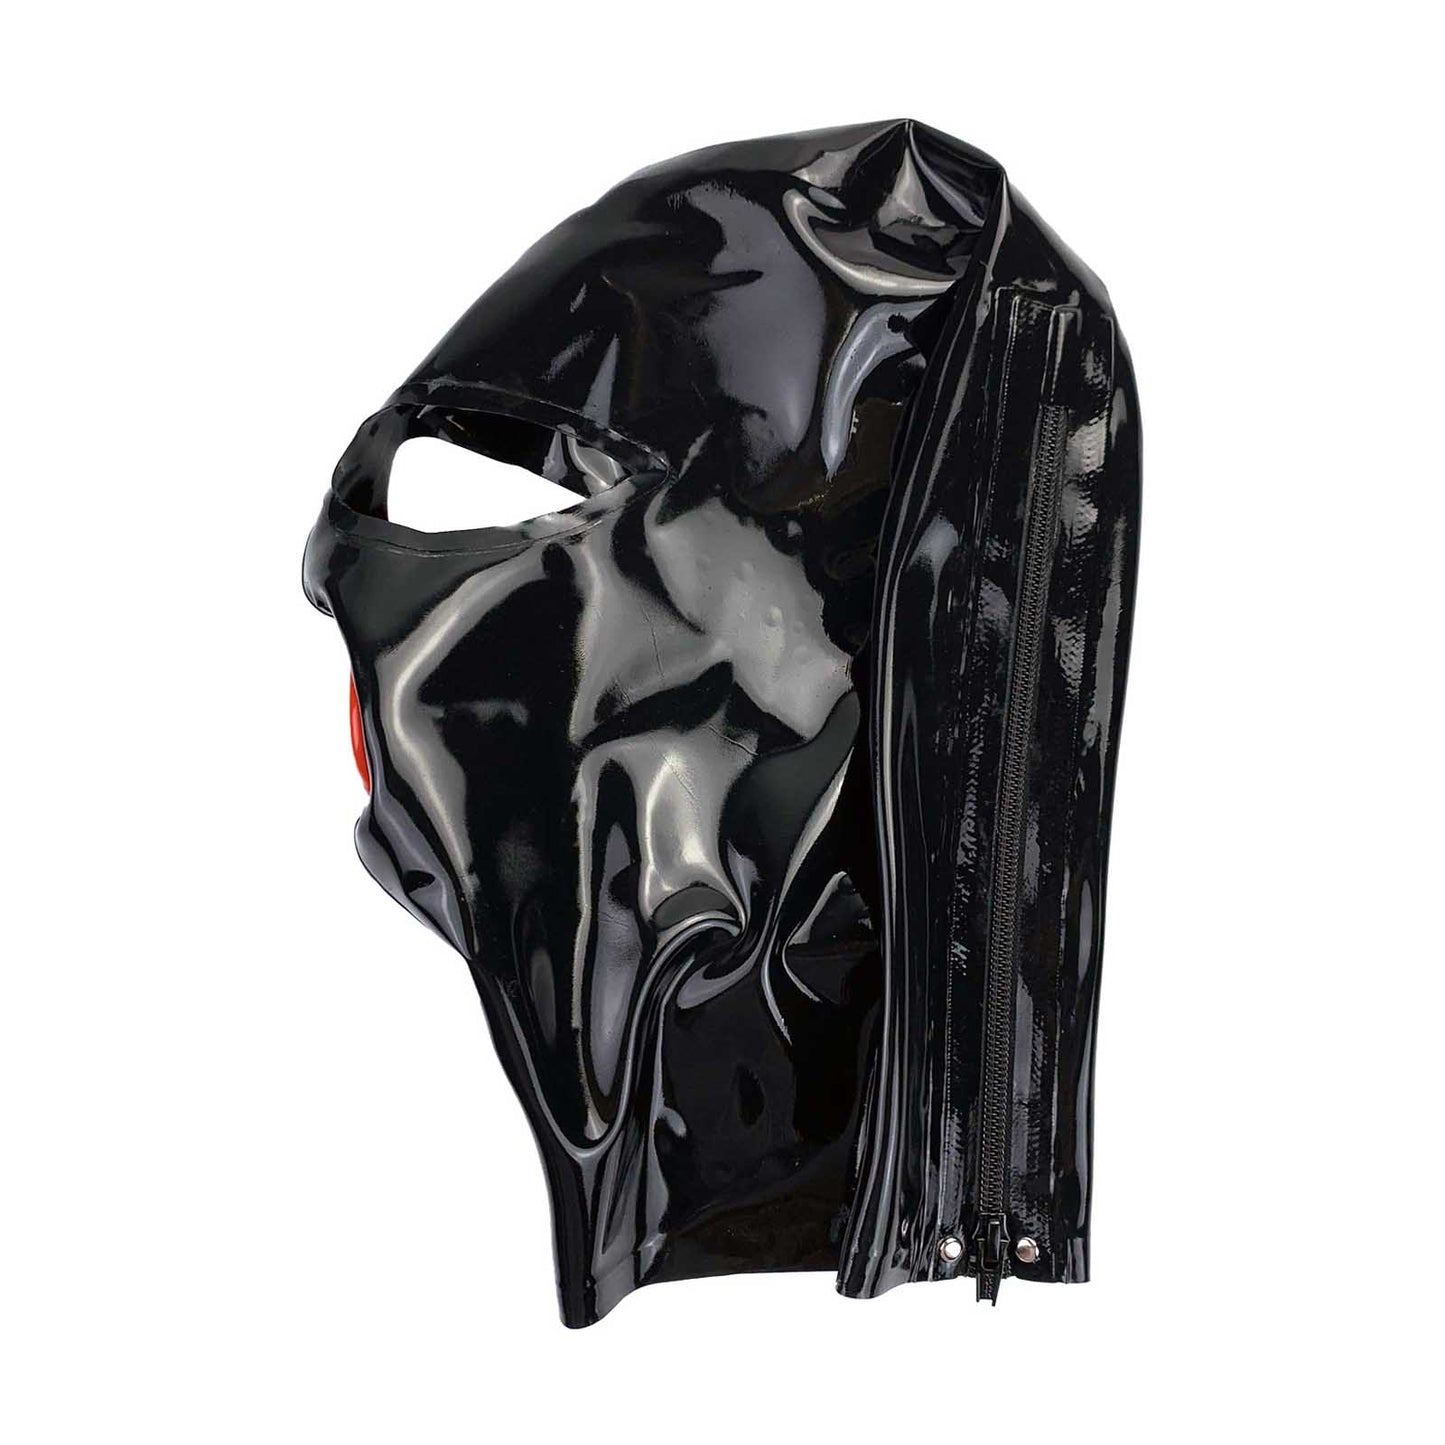 MONNIK Latex Mask Hood with Red Mouth Sleeve and Cut-outs for Nostrils with Rear Zipper Handmade